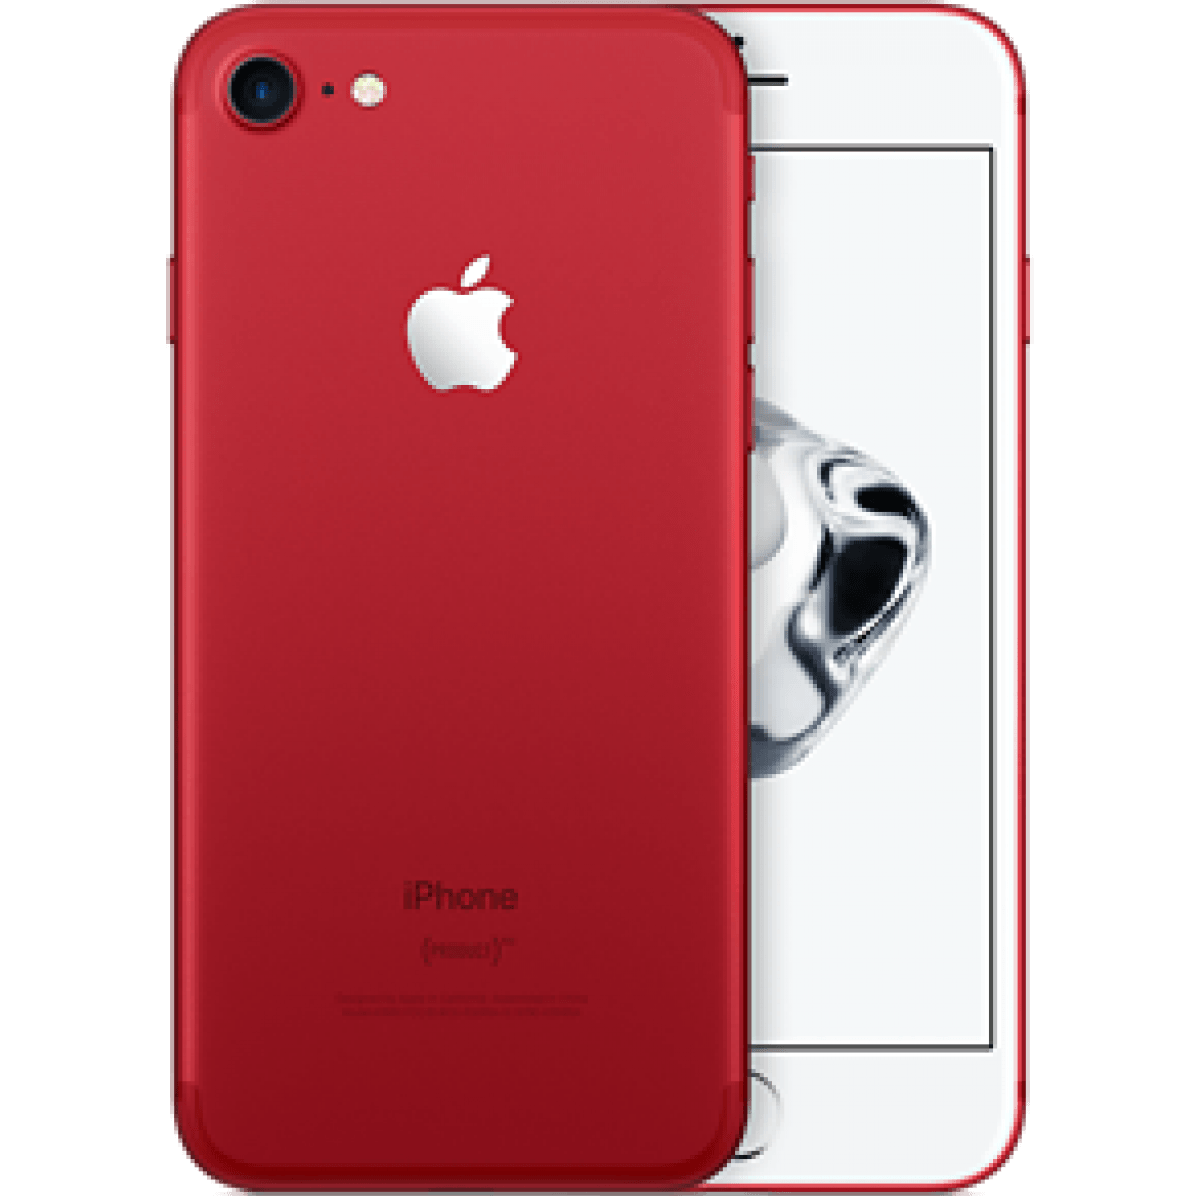 Rent Apple iPhone 7 128GB from €19.90 per month